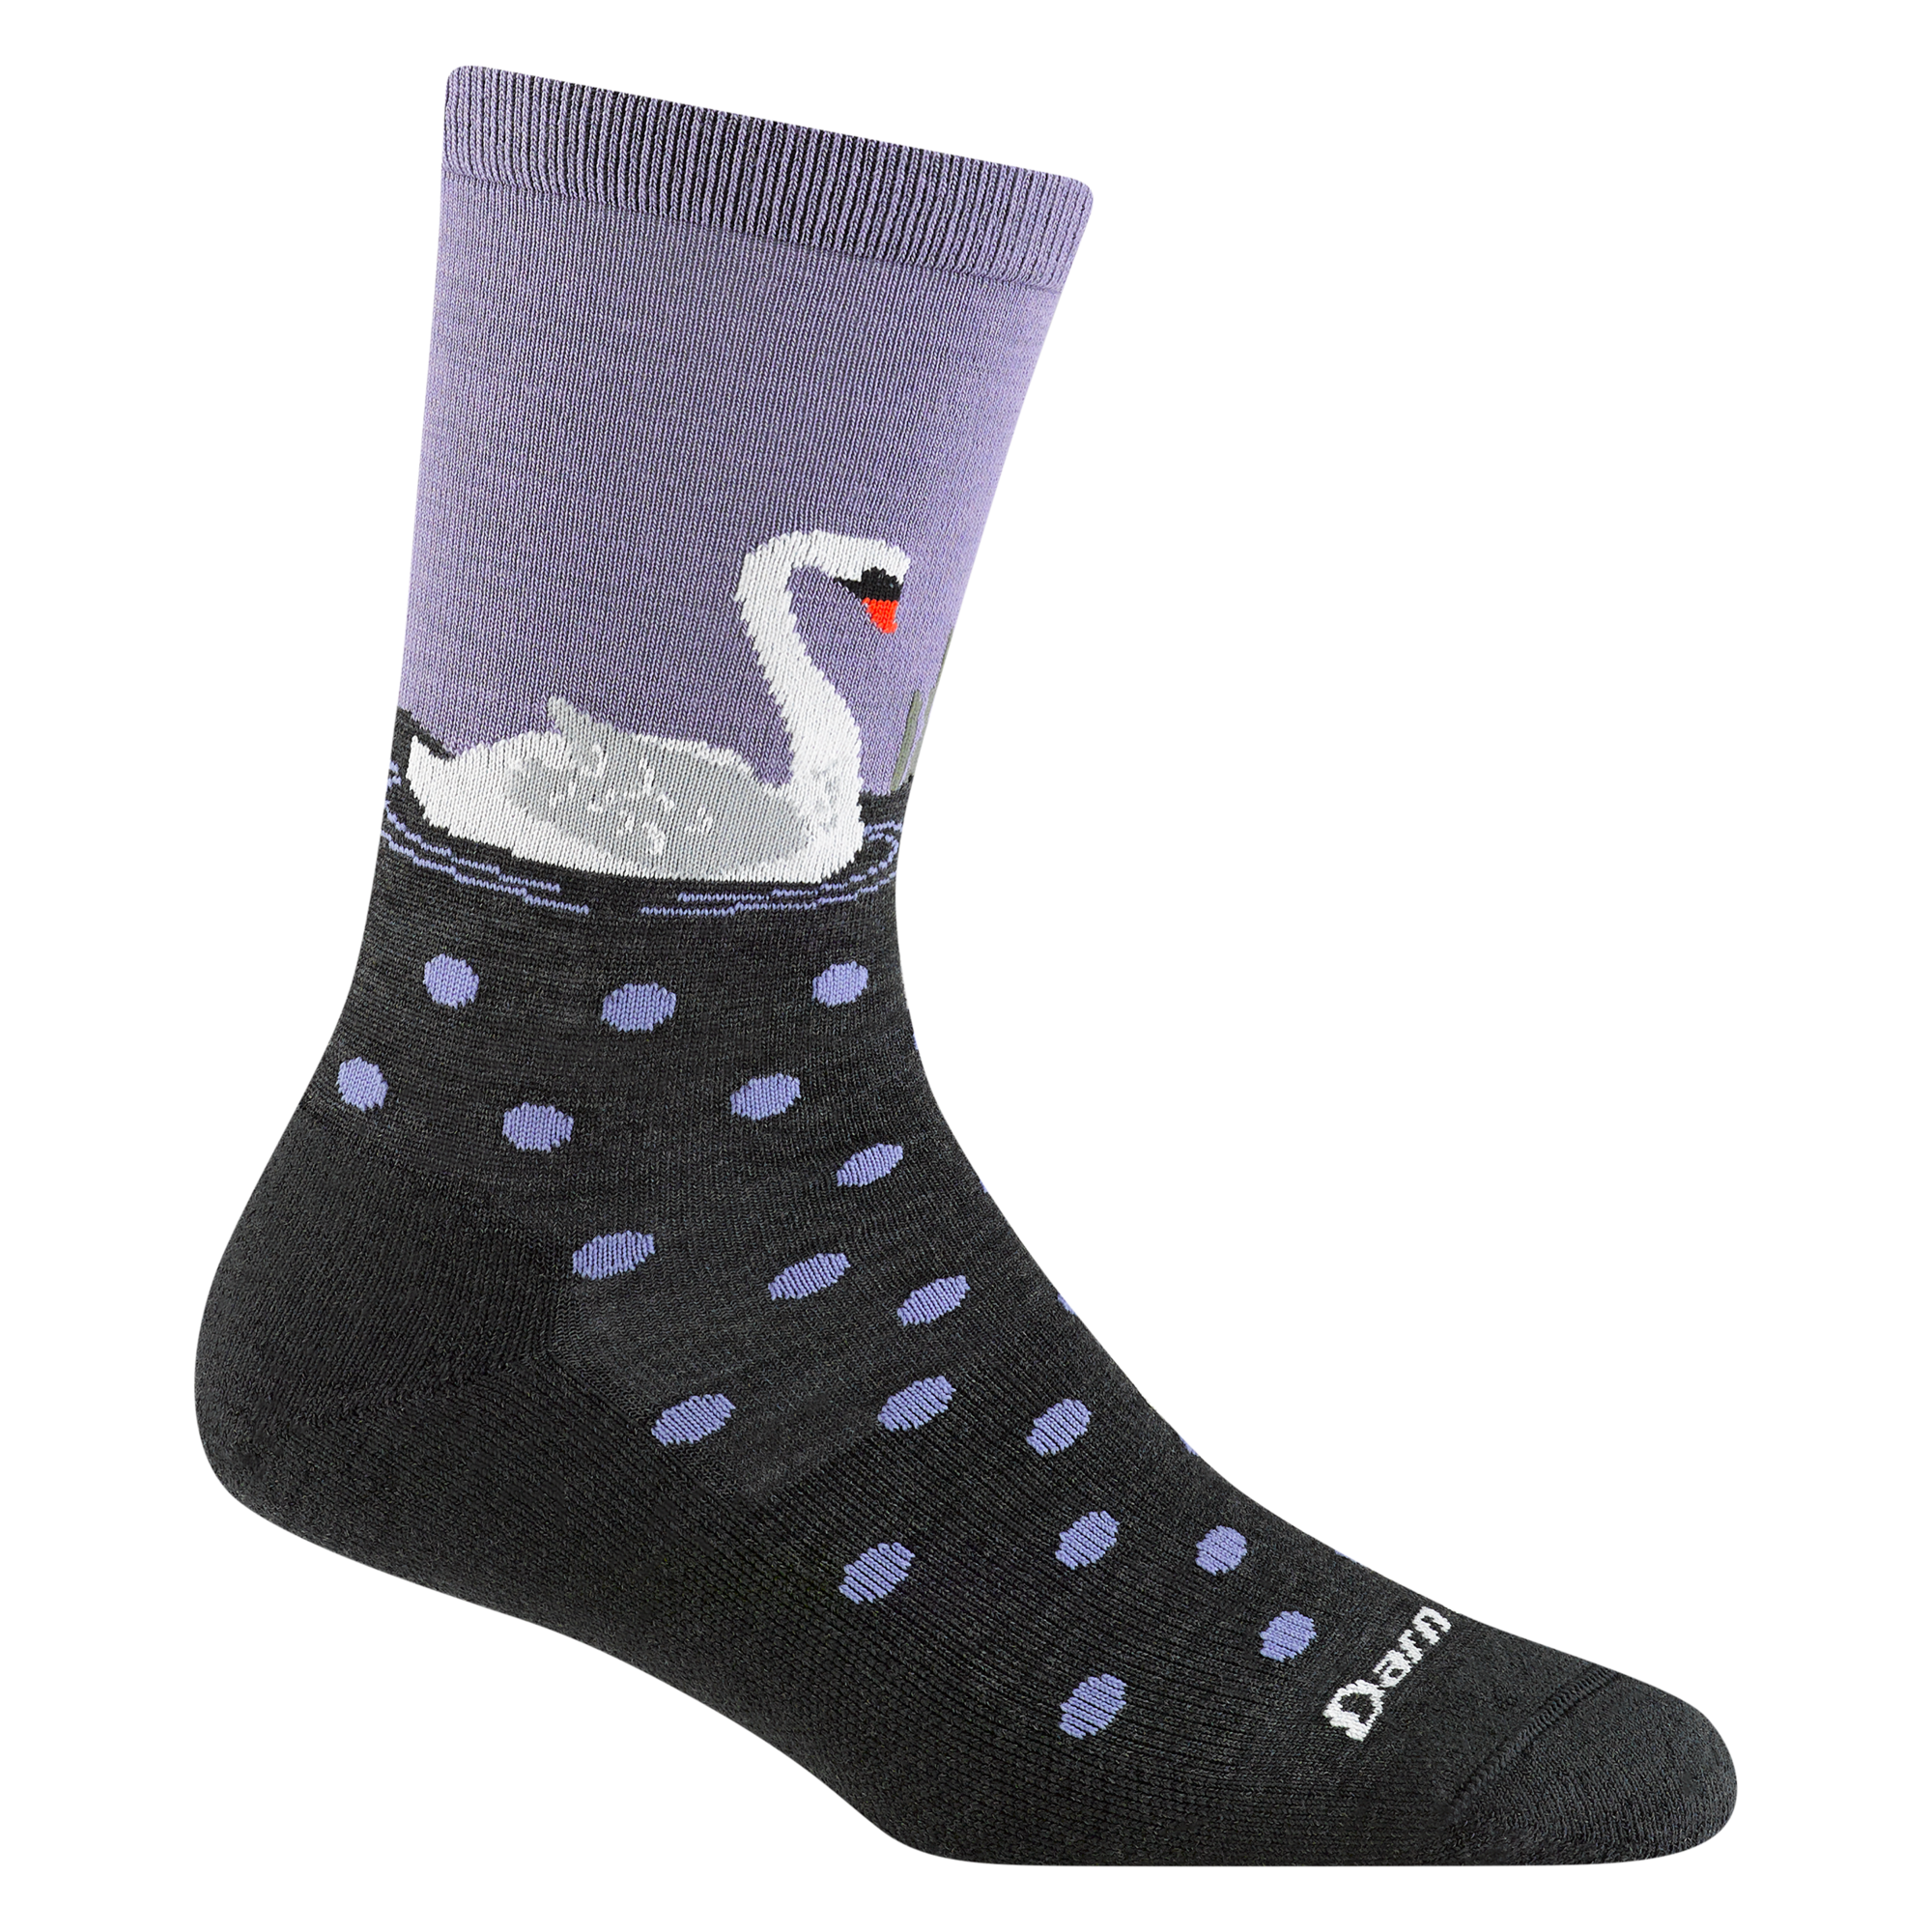 Women's wild life micro crew lifestyle sock in chacoal with a white swimming swan and purple polka dots